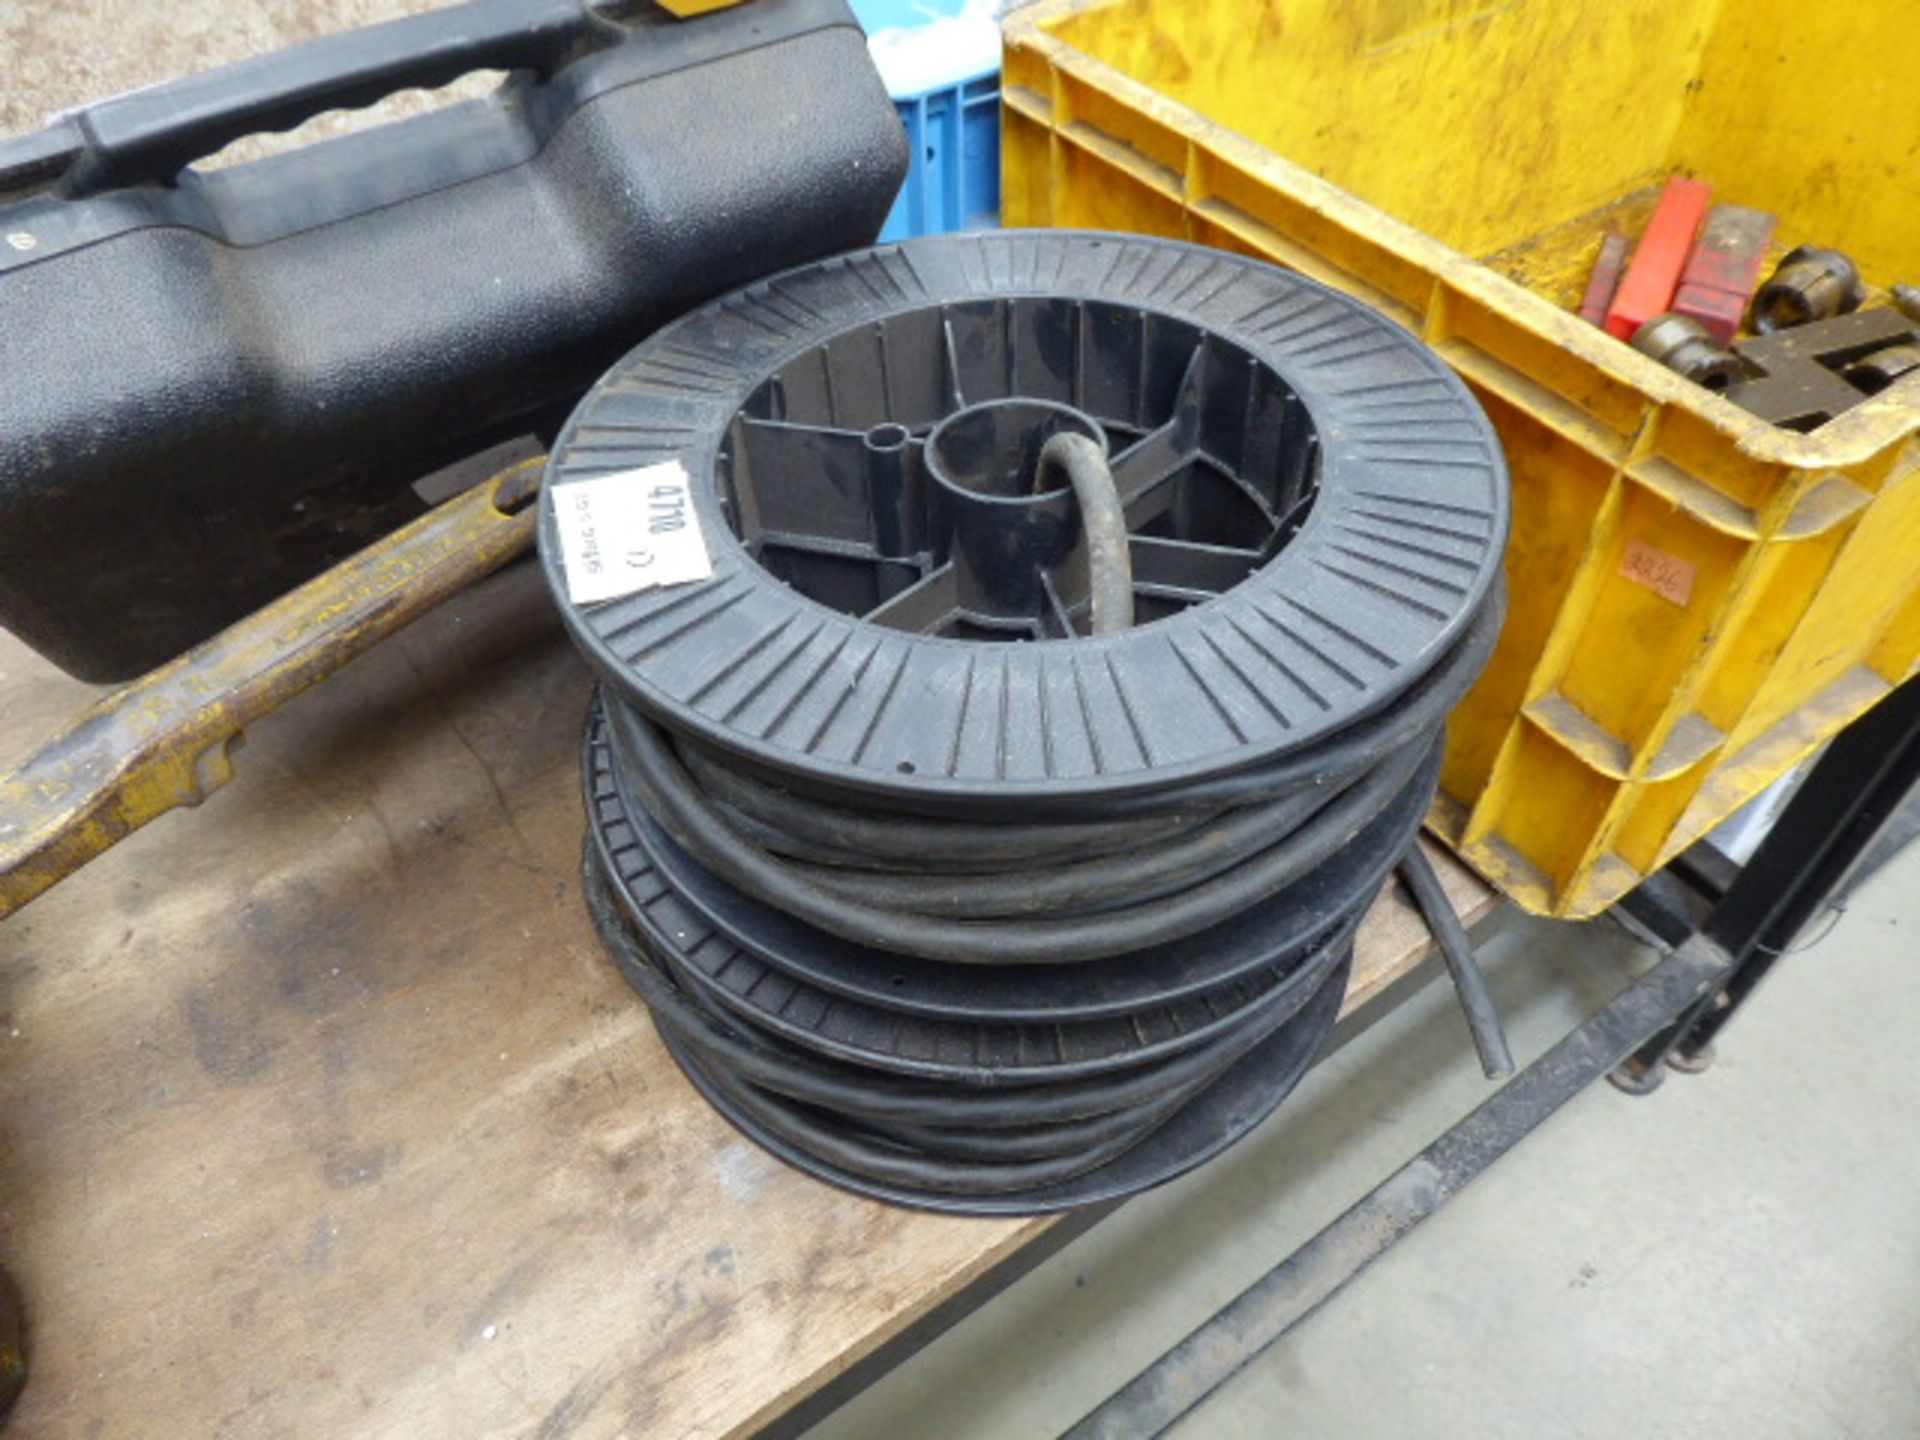 2 reels of cable